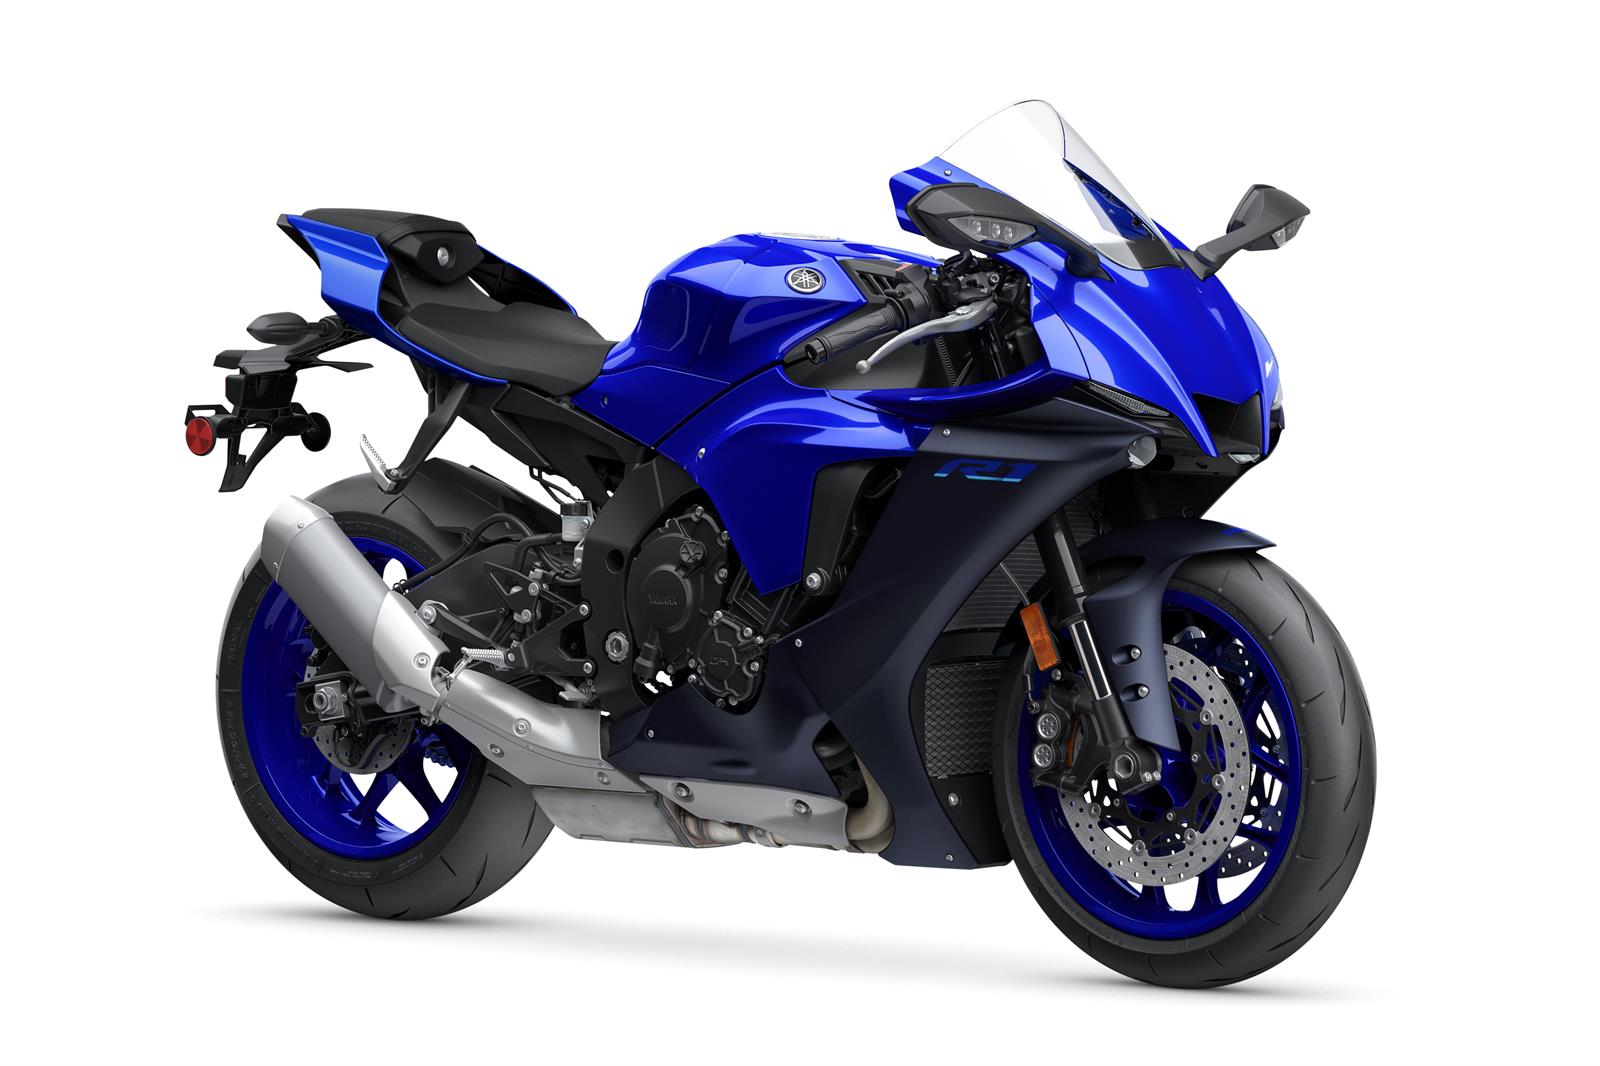 Yamaha Supersport motorcycle YZF R1 for sale